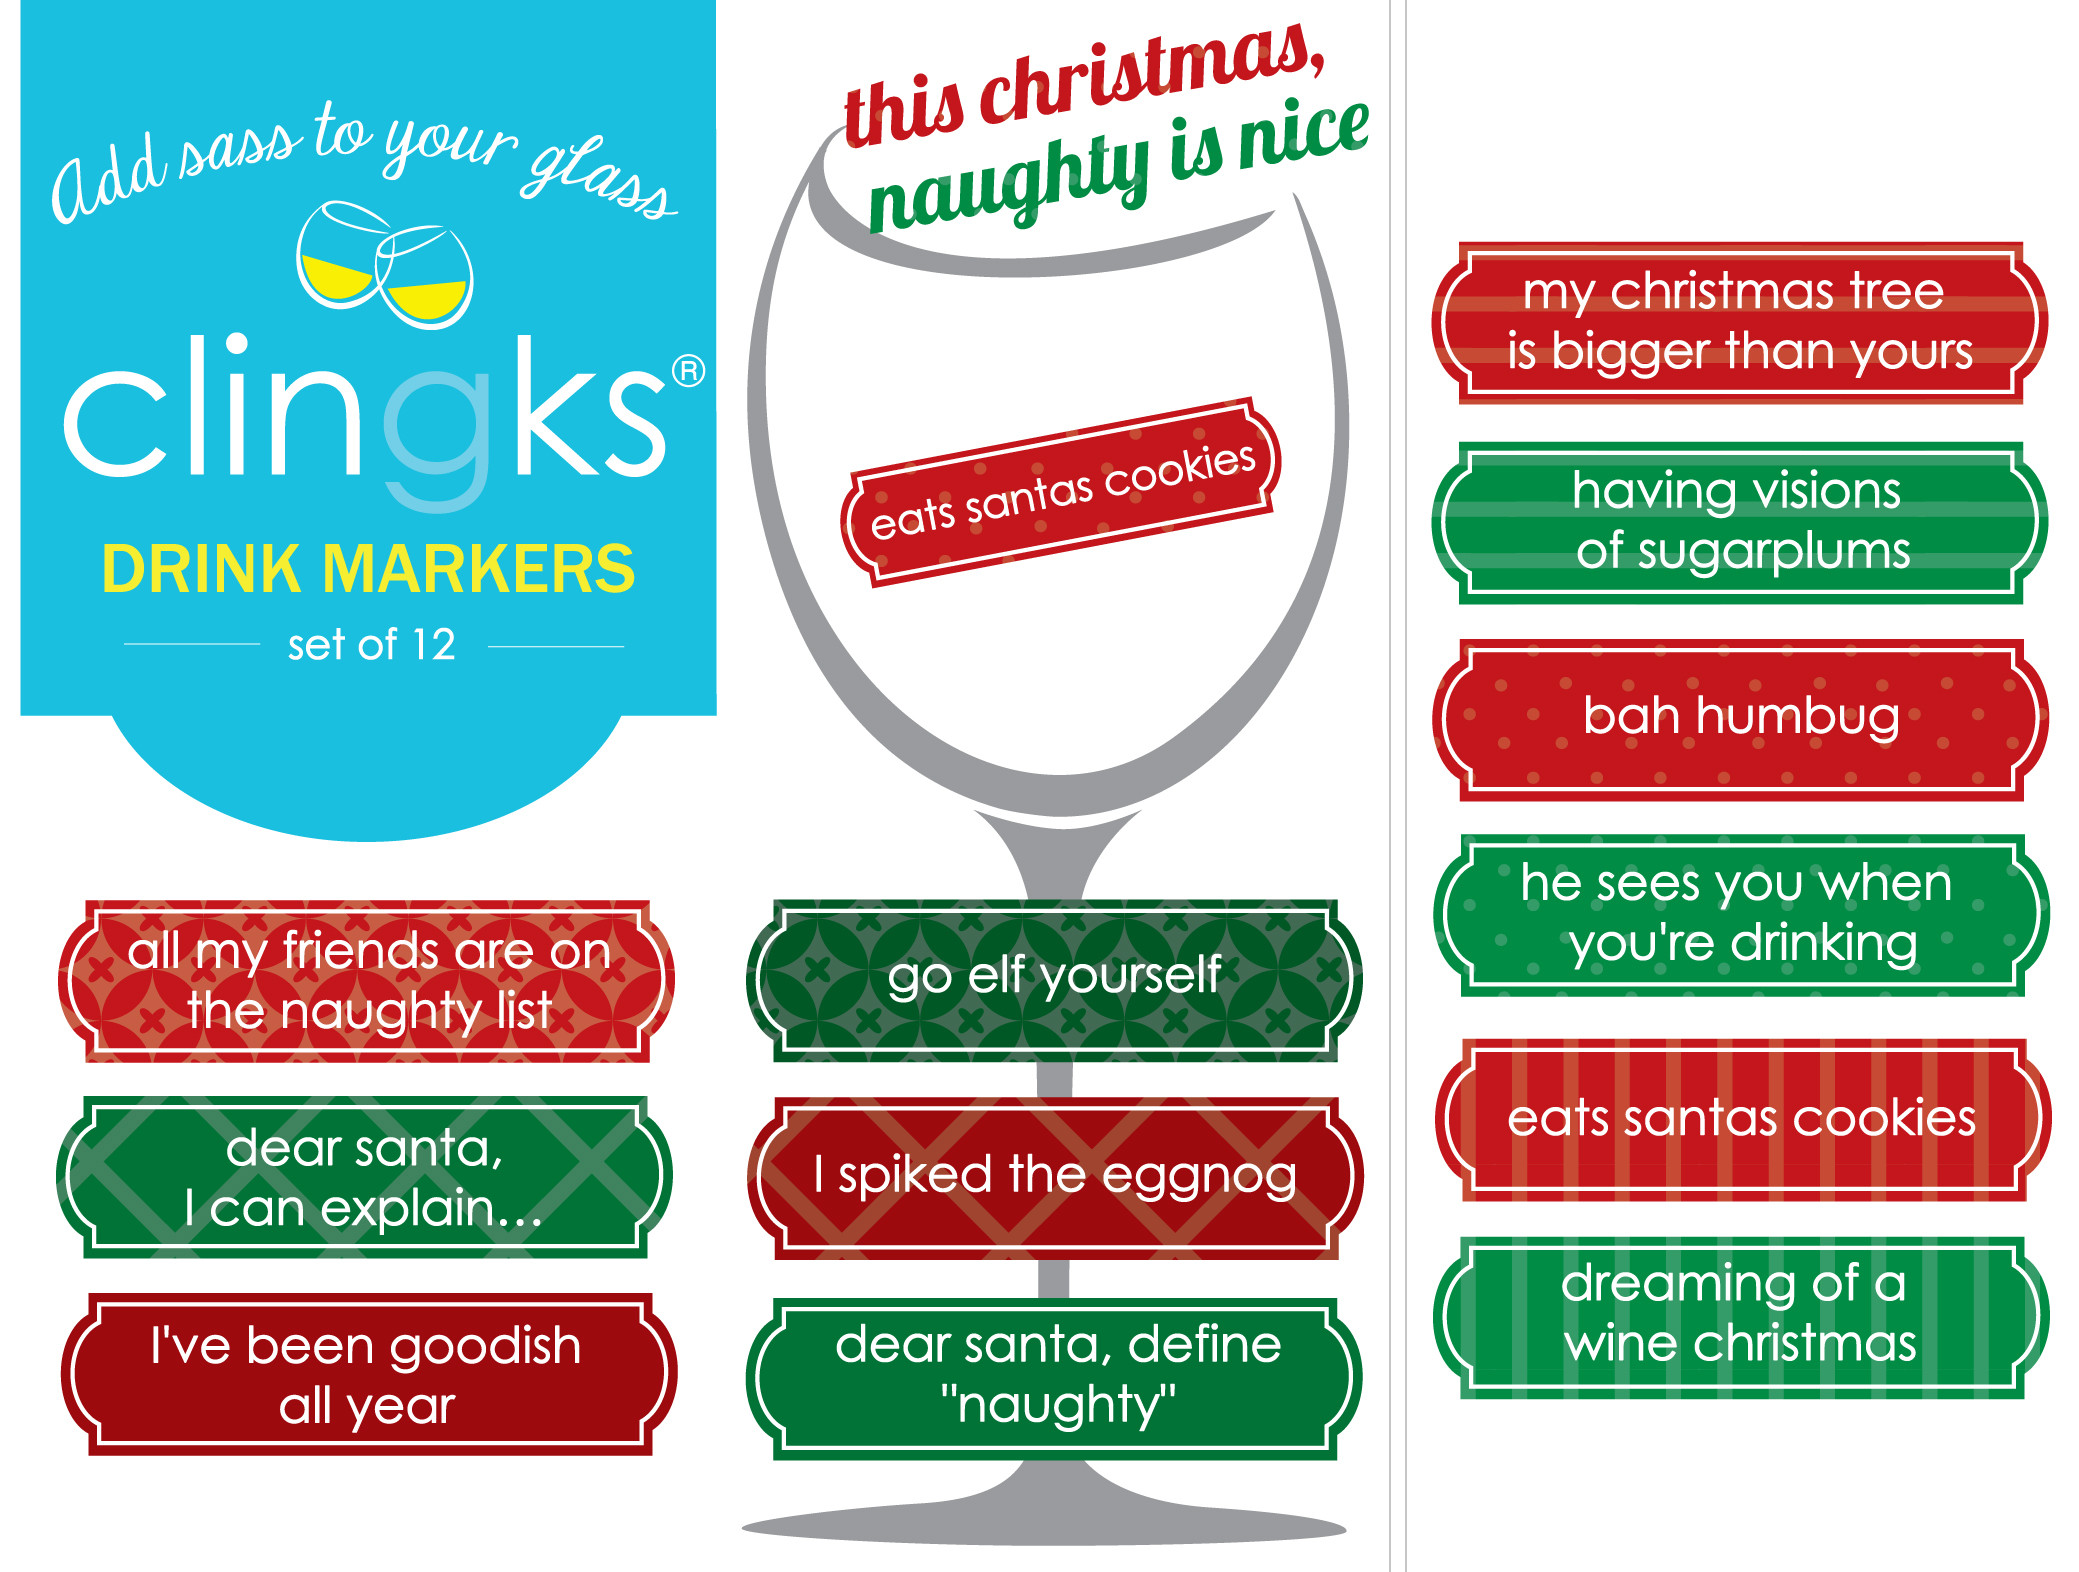 Christmas Drinking Quotes
 Clingks Drink Markers – Happy Hour